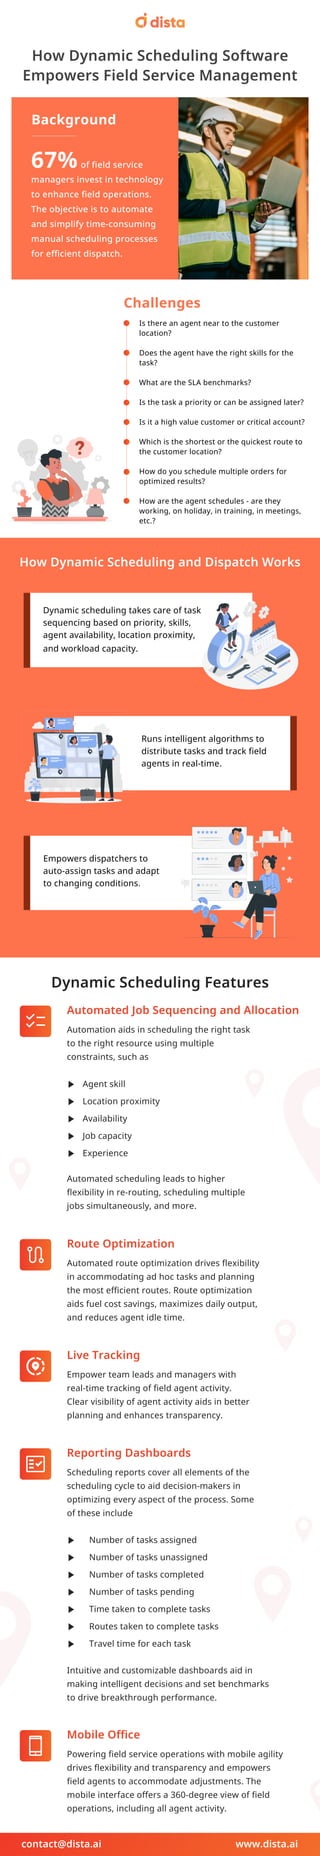 How Dynamic Scheduling Software
Empowers Field Service Management
Background
Challenges
How Dynamic Scheduling and Dispatch Works
Dynamic Scheduling Features
67%of field service
managers invest in technology
to enhance field operations.
The objective is to automate
and simplify time-consuming
manual scheduling processes
for efficient dispatch.
Is there an agent near to the customer
location?
Does the agent have the right skills for the
task?
What are the SLA benchmarks?
Is the task a priority or can be assigned later?
Is it a high value customer or critical account?
Which is the shortest or the quickest route to
the customer location?
How do you schedule multiple orders for
optimized results?
How are the agent schedules - are they
working, on holiday, in training, in meetings,
etc.?
Dynamic scheduling takes care of task
sequencing based on priority, skills,
agent availability, location proximity,
and workload capacity.
Runs intelligent algorithms to
distribute tasks and track field
agents in real-time.
Empowers dispatchers to
auto-assign tasks and adapt
to changing conditions.
Automated Job Sequencing and Allocation
Route Optimization
Live Tracking
Mobile Office
Reporting Dashboards
Automation aids in scheduling the right task
to the right resource using multiple
constraints, such as
▶ Agent skill
▶ Location proximity
▶ Availability
▶ Job capacity
▶ Experience
Automated scheduling leads to higher
flexibility in re-routing, scheduling multiple
jobs simultaneously, and more.
Automated route optimization drives flexibility
in accommodating ad hoc tasks and planning
the most efficient routes. Route optimization
aids fuel cost savings, maximizes daily output,
and reduces agent idle time.
Empower team leads and managers with
real-time tracking of field agent activity.
Clear visibility of agent activity aids in better
planning and enhances transparency.
Powering field service operations with mobile agility
drives flexibility and transparency and empowers
field agents to accommodate adjustments. The
mobile interface offers a 360-degree view of field
operations, including all agent activity.
Scheduling reports cover all elements of the
scheduling cycle to aid decision-makers in
optimizing every aspect of the process. Some
of these include
Intuitive and customizable dashboards aid in
making intelligent decisions and set benchmarks
to drive breakthrough performance.
▶ Number of tasks assigned
▶ Number of tasks unassigned
▶ Number of tasks completed
▶ Number of tasks pending
▶ Time taken to complete tasks
▶ Routes taken to complete tasks
▶ Travel time for each task
contact@dista.ai www.dista.ai
 